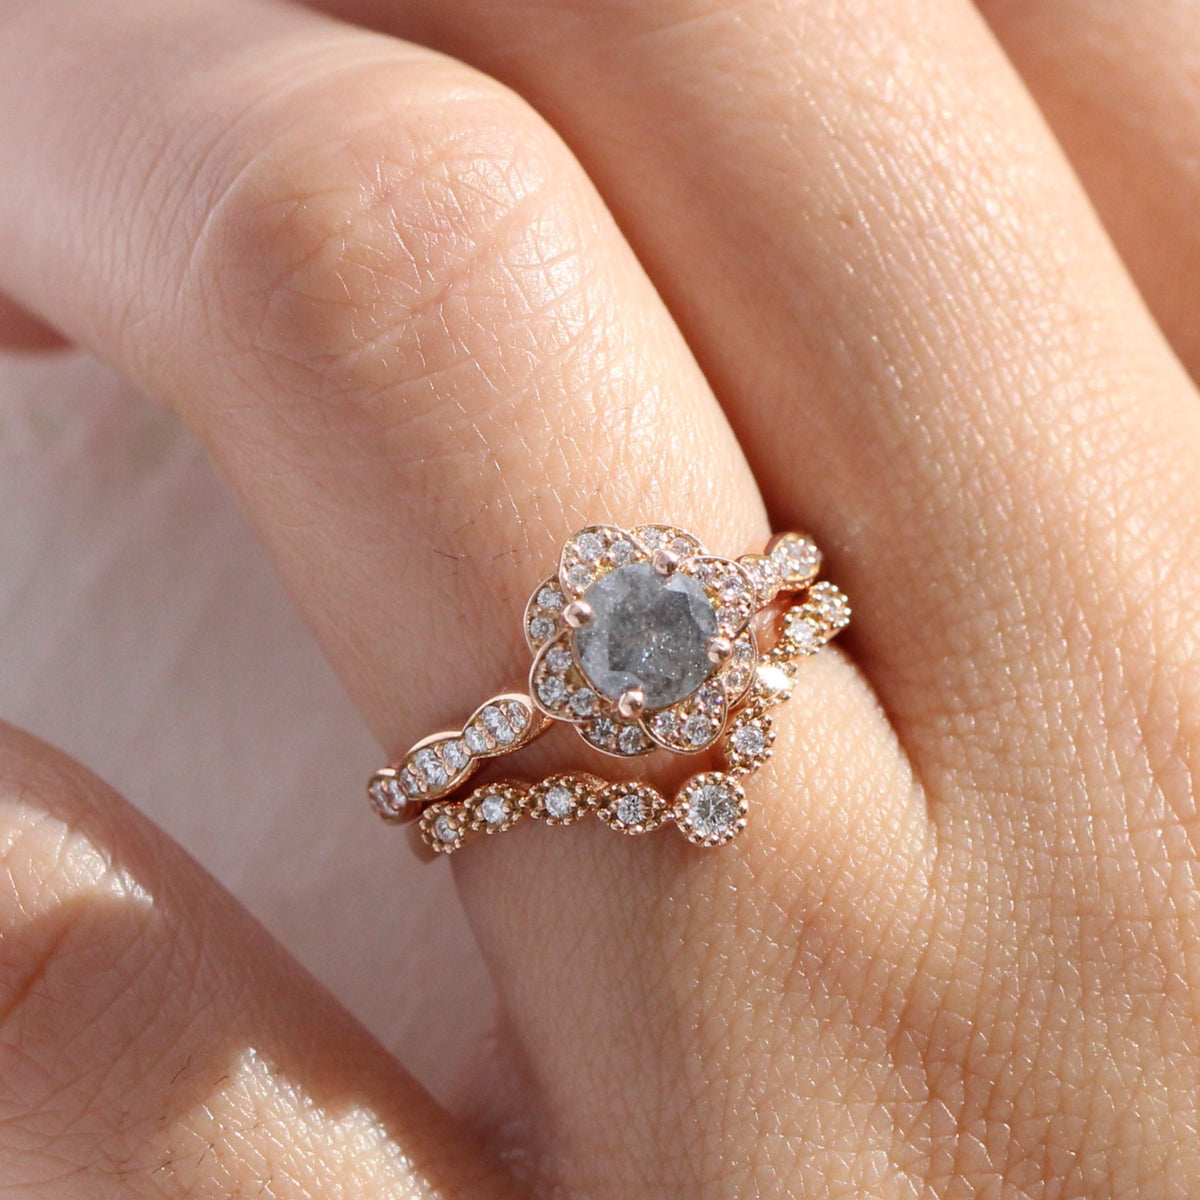 Vintage Style Engagement Rings, Antique Style Rings and Wedding